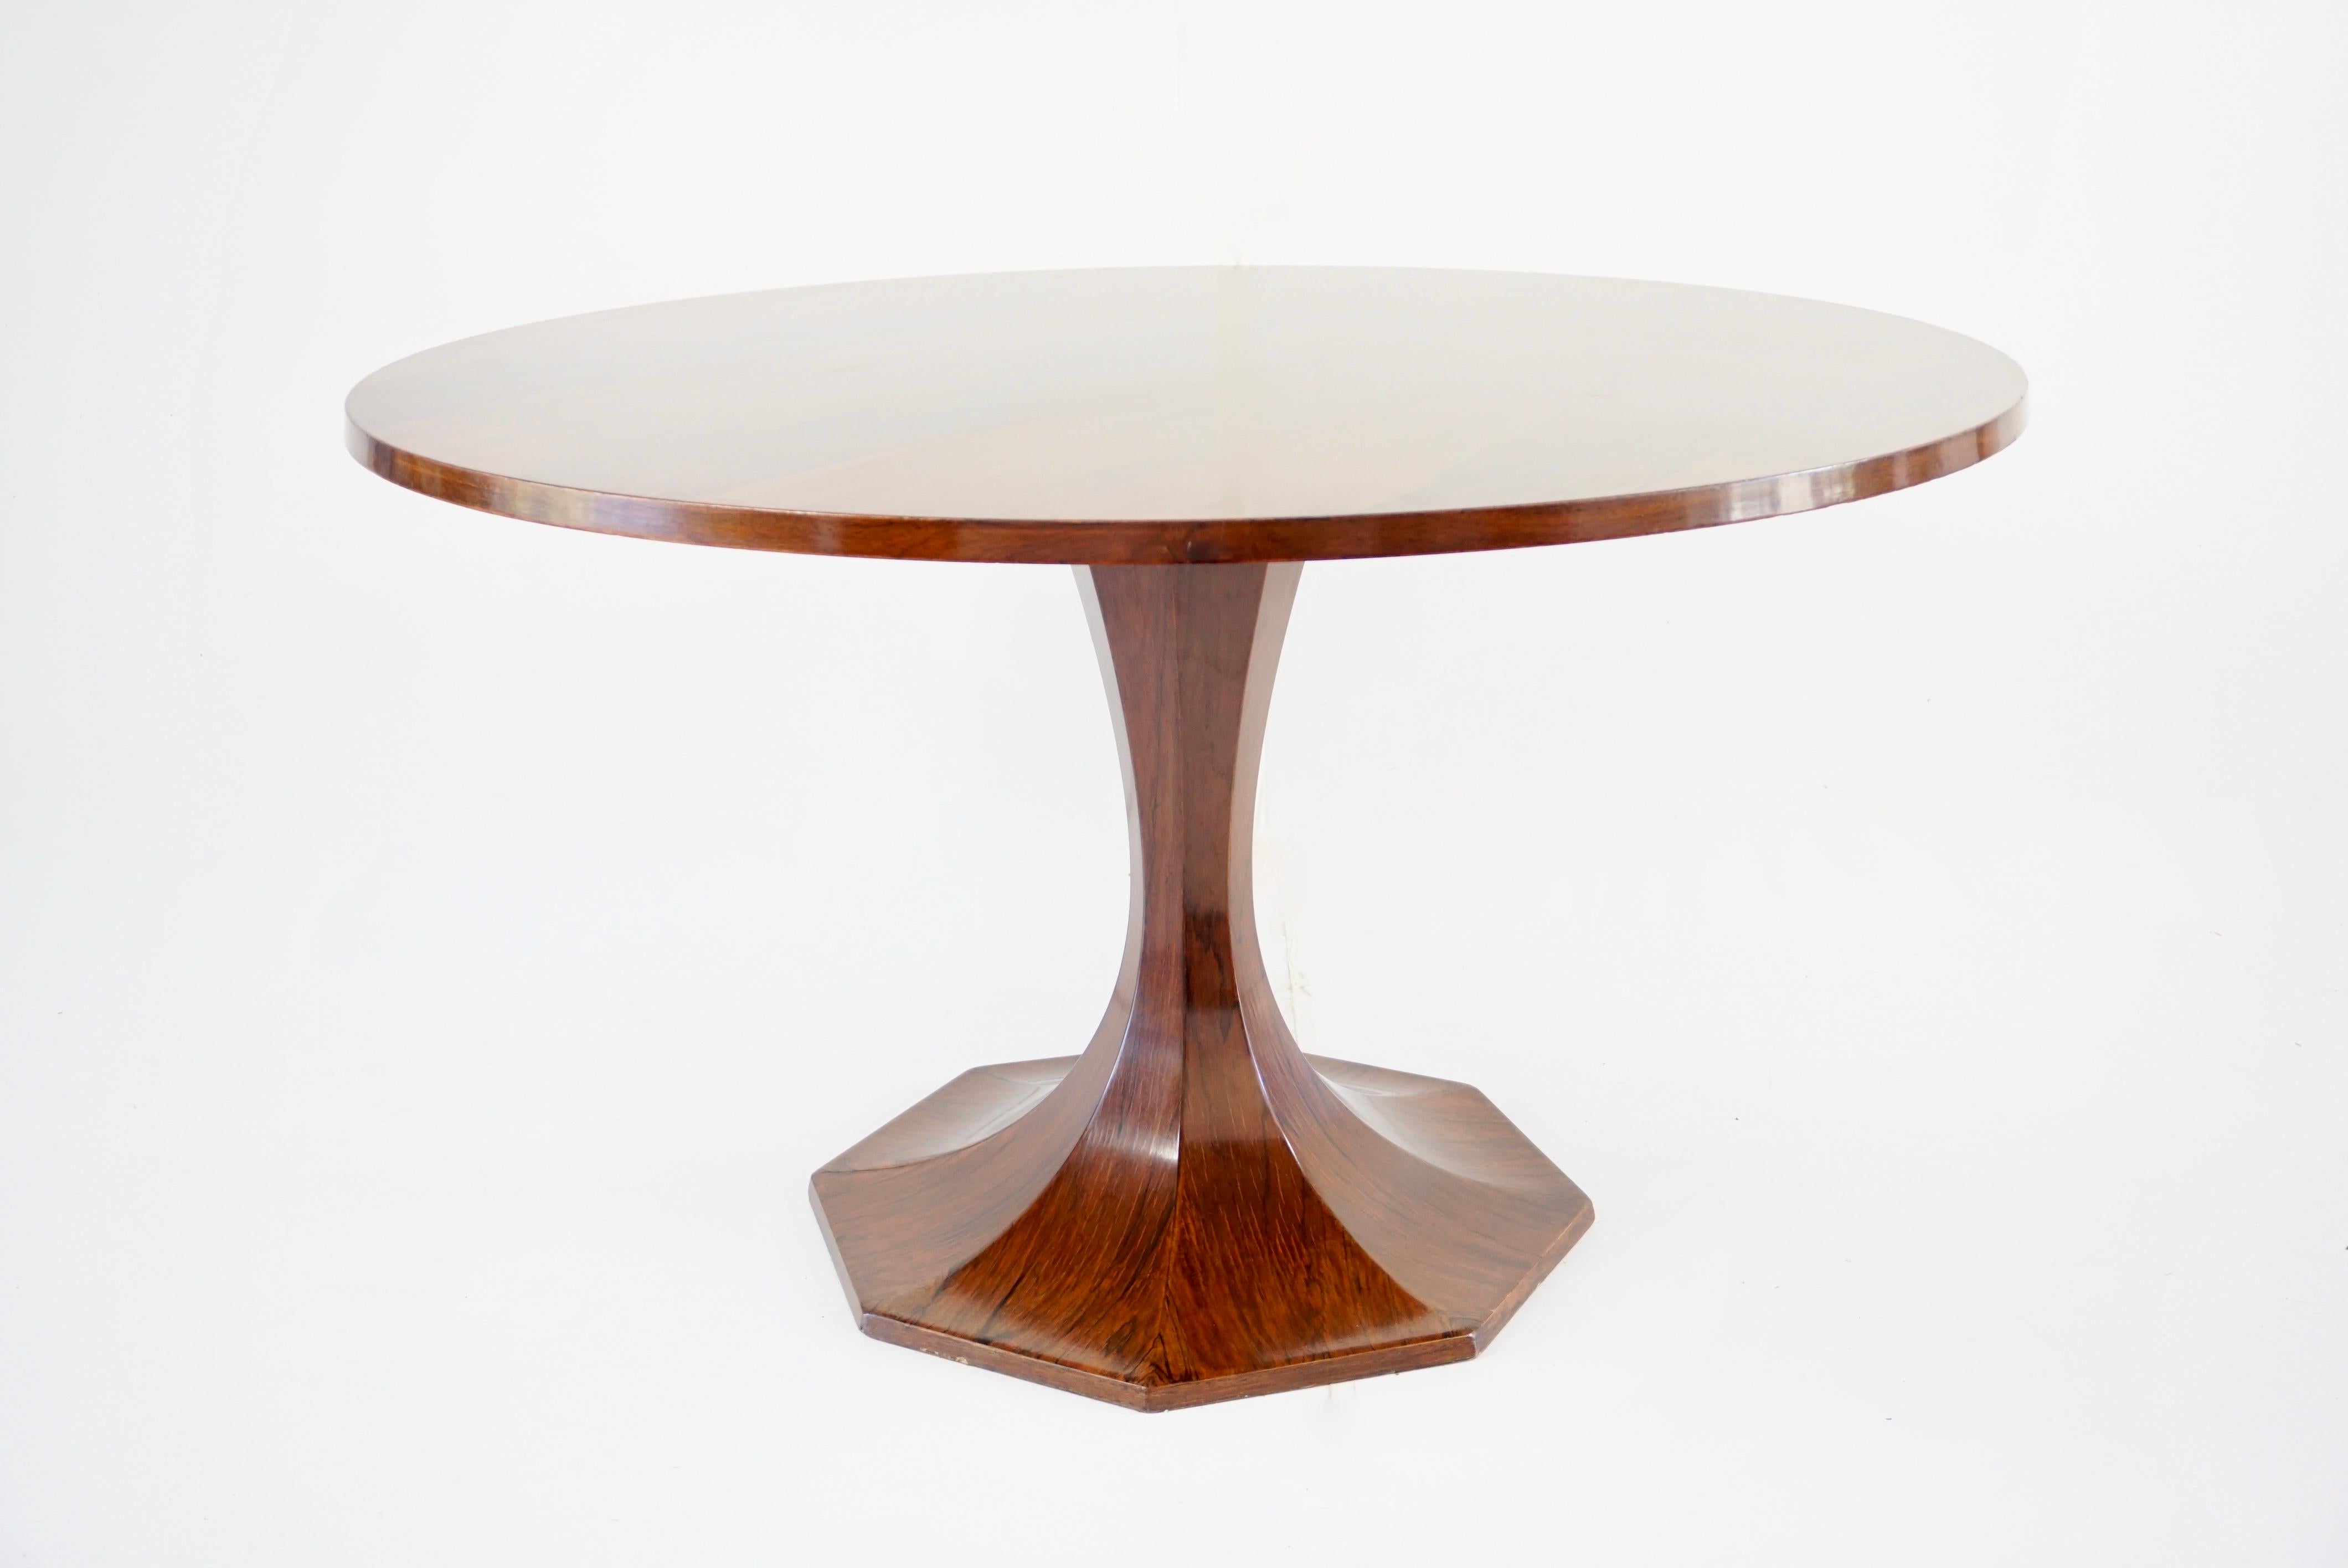 gorgeous large pedestal Carlo De Carli dining table, circa 1960 
bentwood, veneer 
very good original patina 
sculptural foot. The wooden grain has an admirable expression with dark grains that defines the aesthetics of this table
octagonal